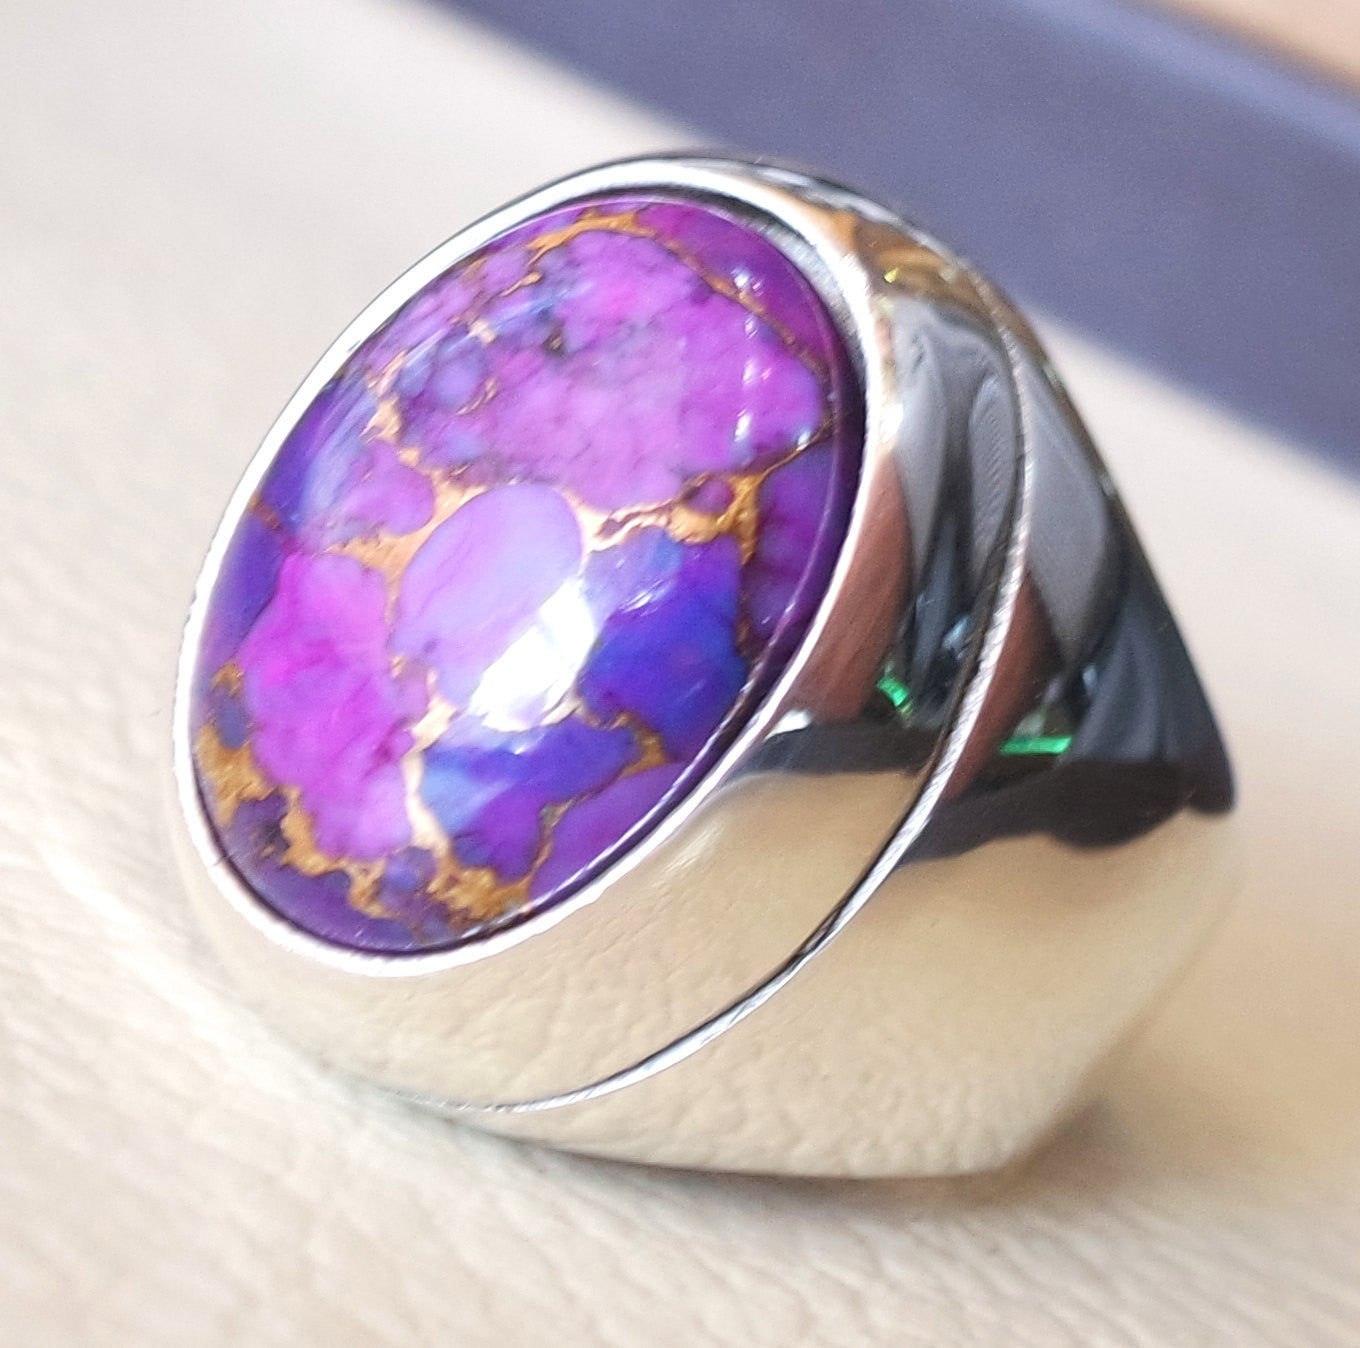 ottoman style heavy huge ring men sterling silver 925 jewelry copper purple turquoise high quality semi precious natural stone fast shipping